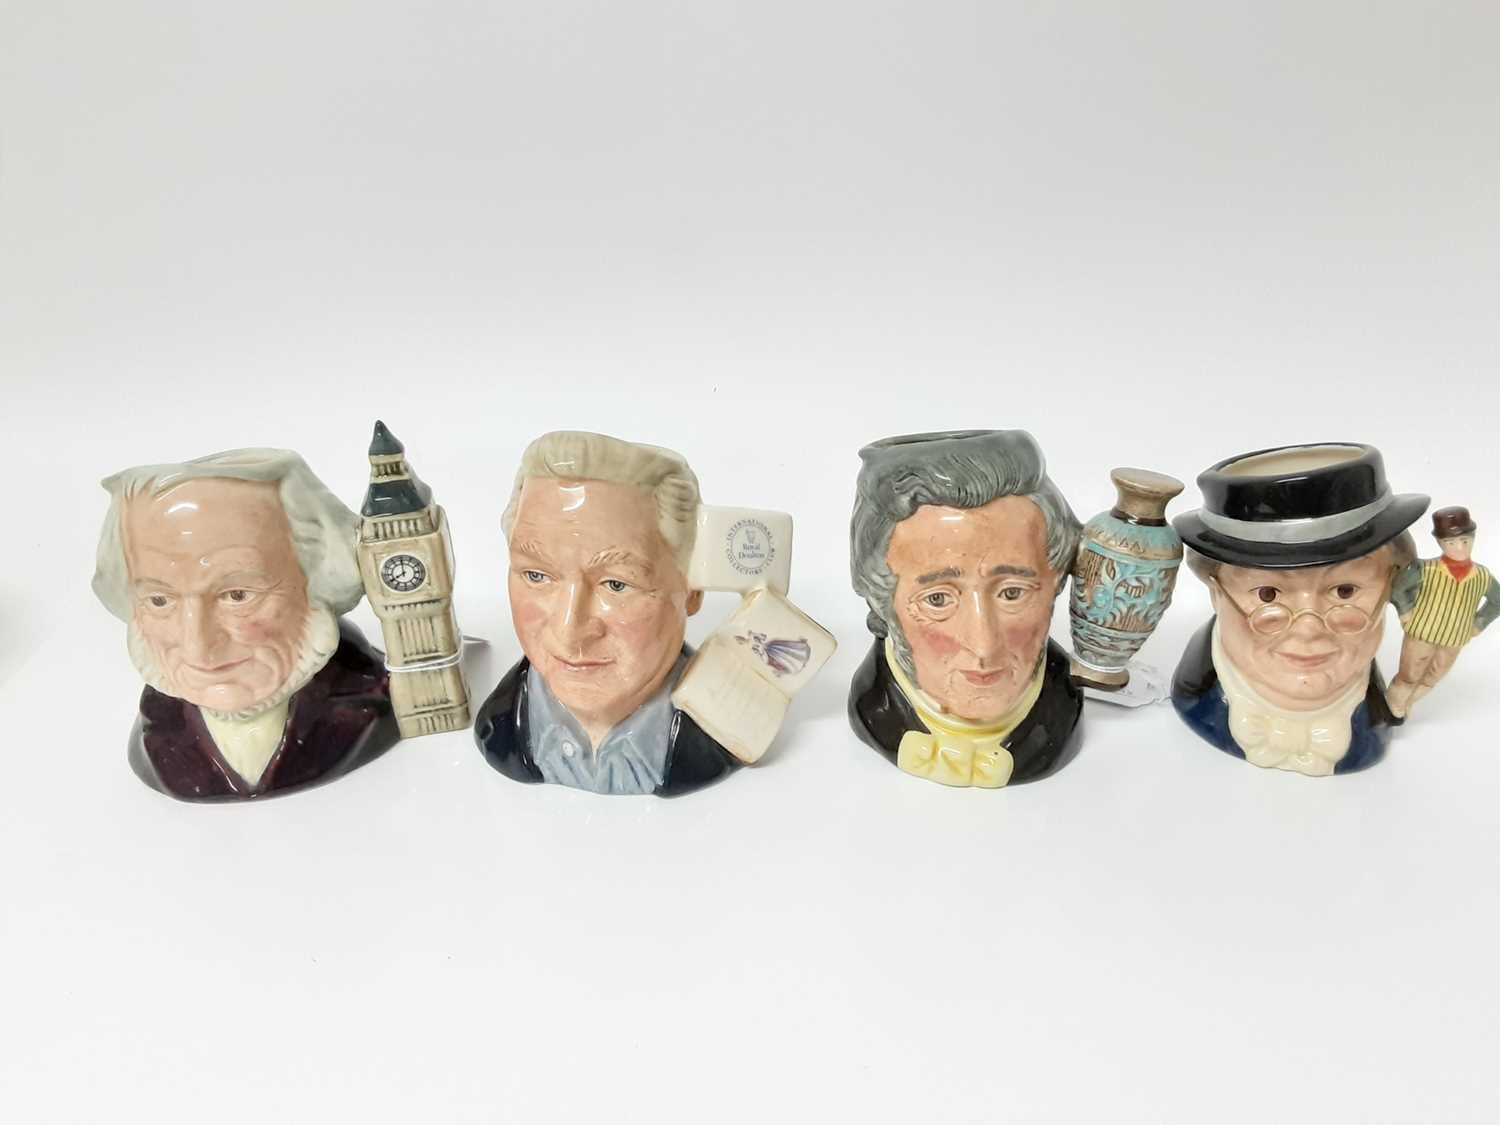 Lot 6 - Eight Royal Doulton character jugs - The Figue Collector D7156, The Jug Collector D7147, george Tinworth D7000, Albert Sagger The Potter D6745, Sir Henry Doulton D6703, Mr Pickwick D7025, John Doul...